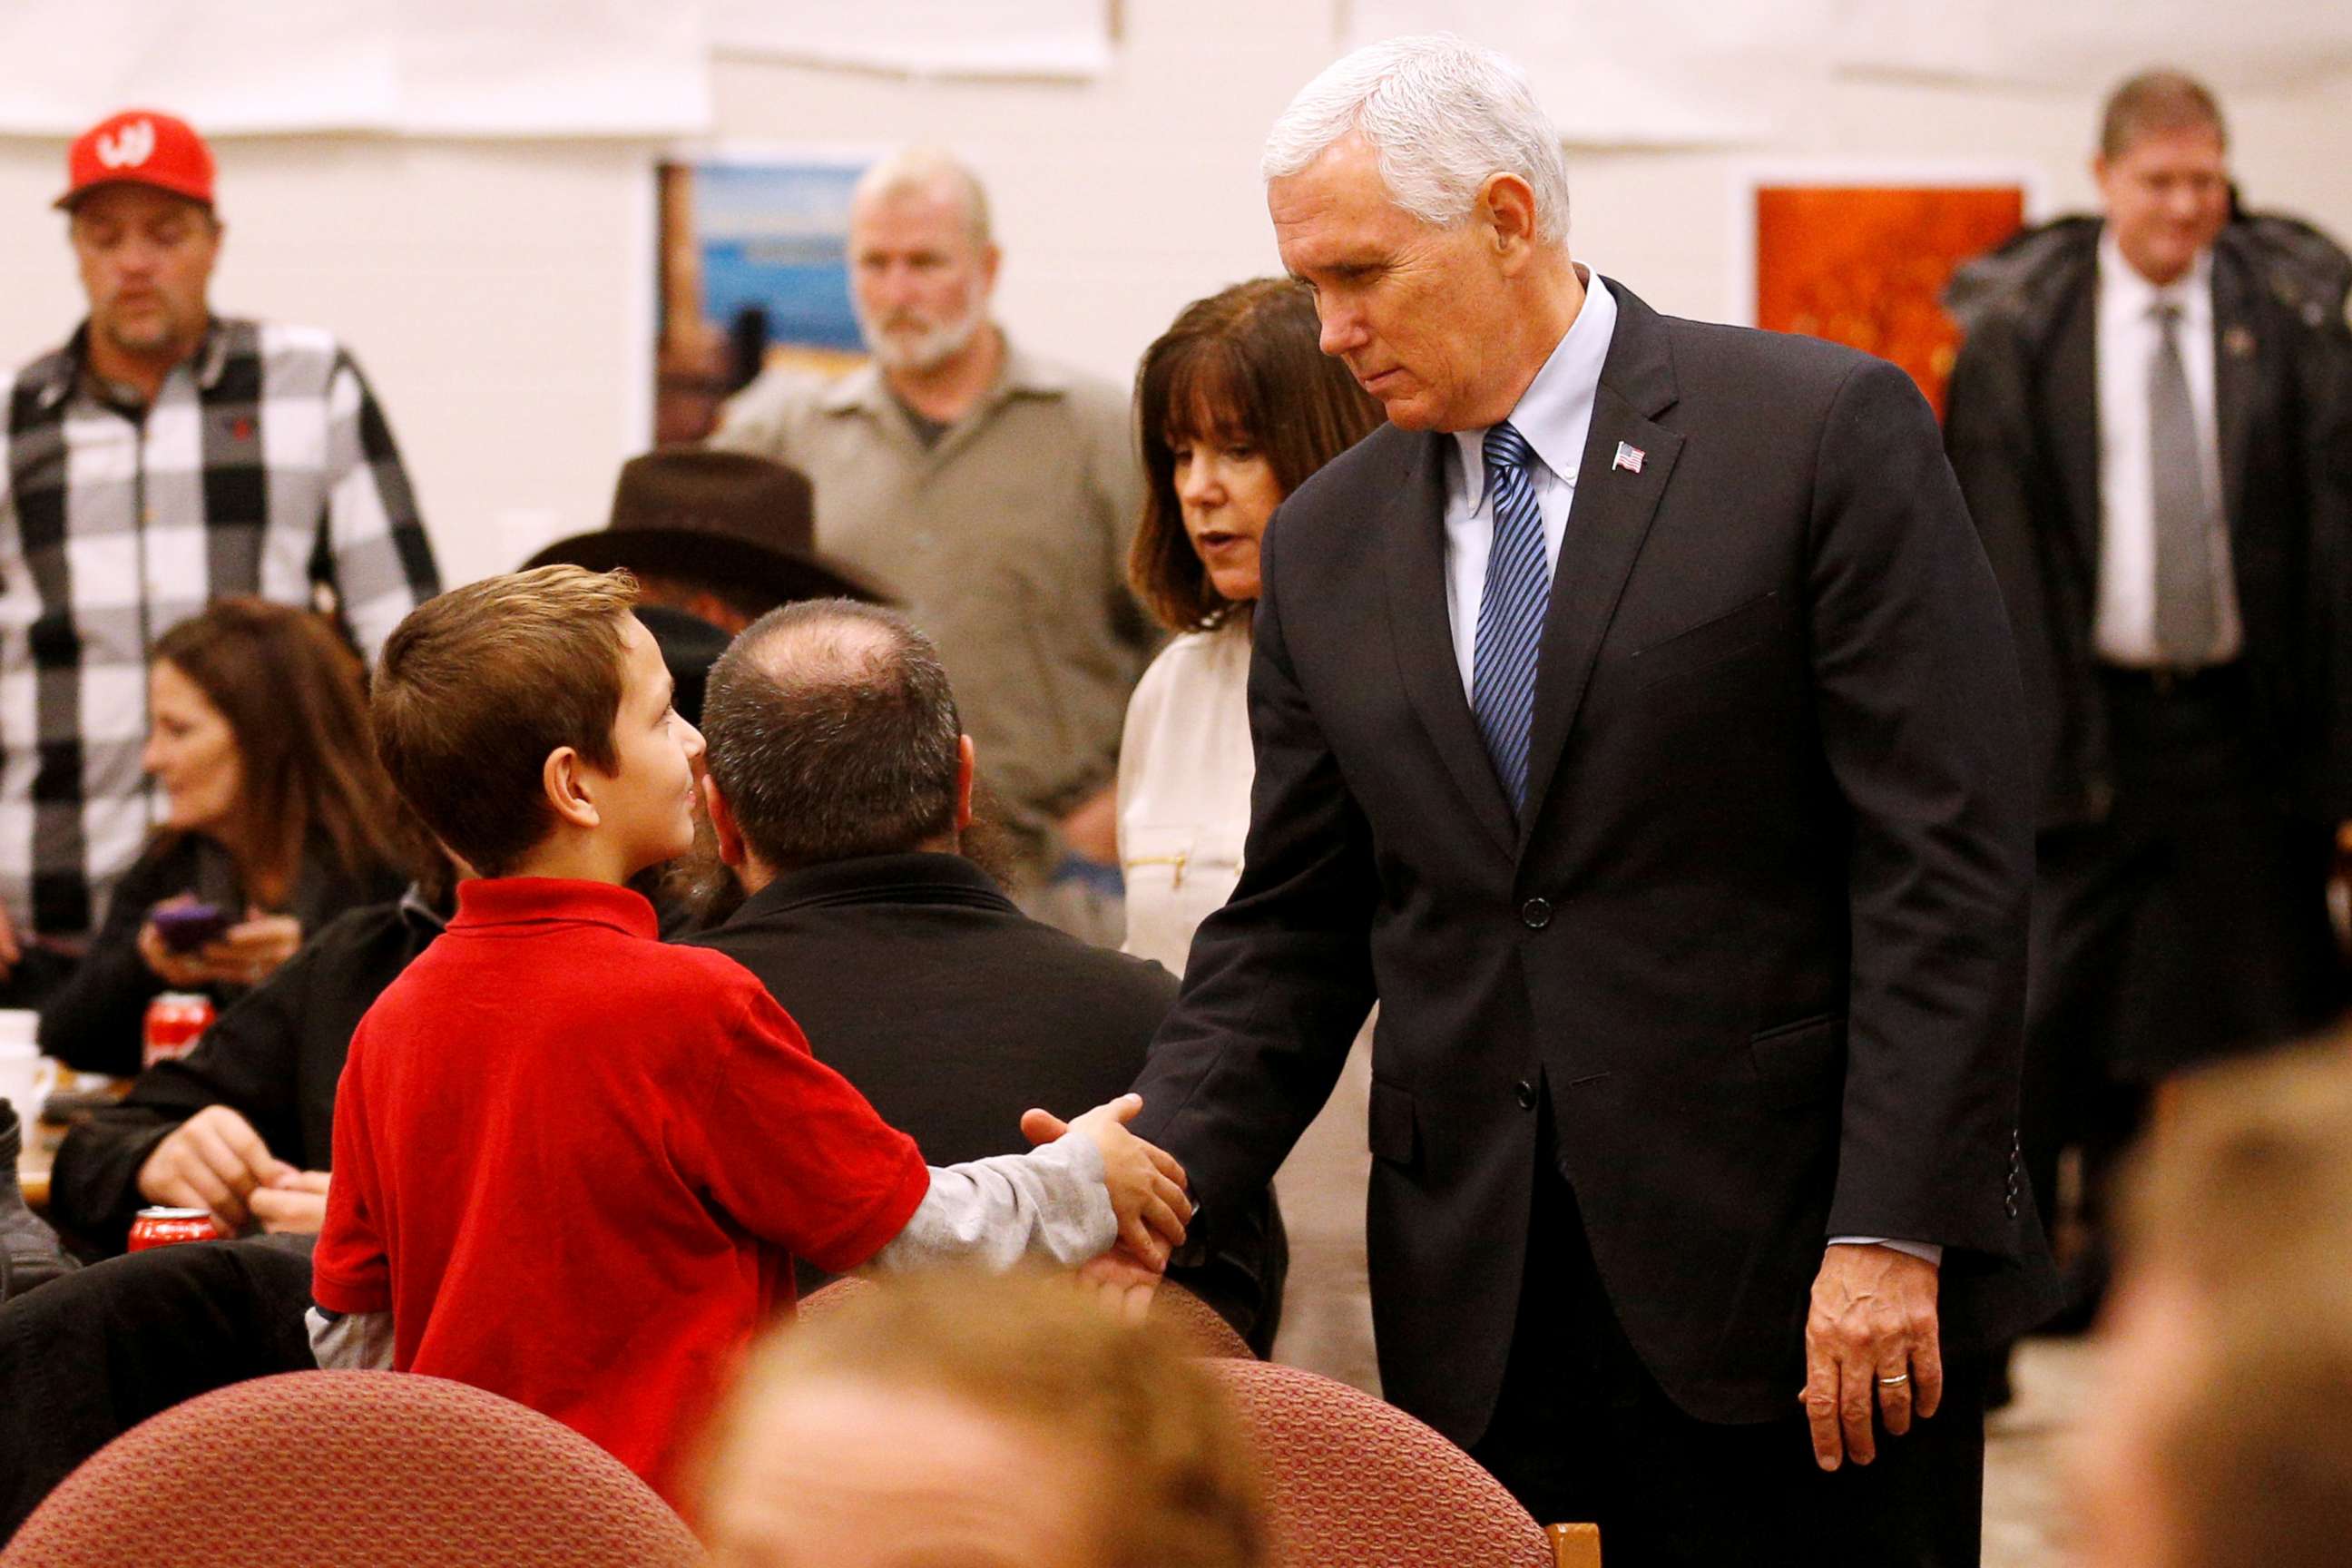 PHOTO: Vice President Mike Pence greets a young boy at Floresville high school during a visit with family and victims of the shooting at First Baptist Church in Sutherland Springs, before a vigil in Floresville, Texas, Nov. 8, 2017.